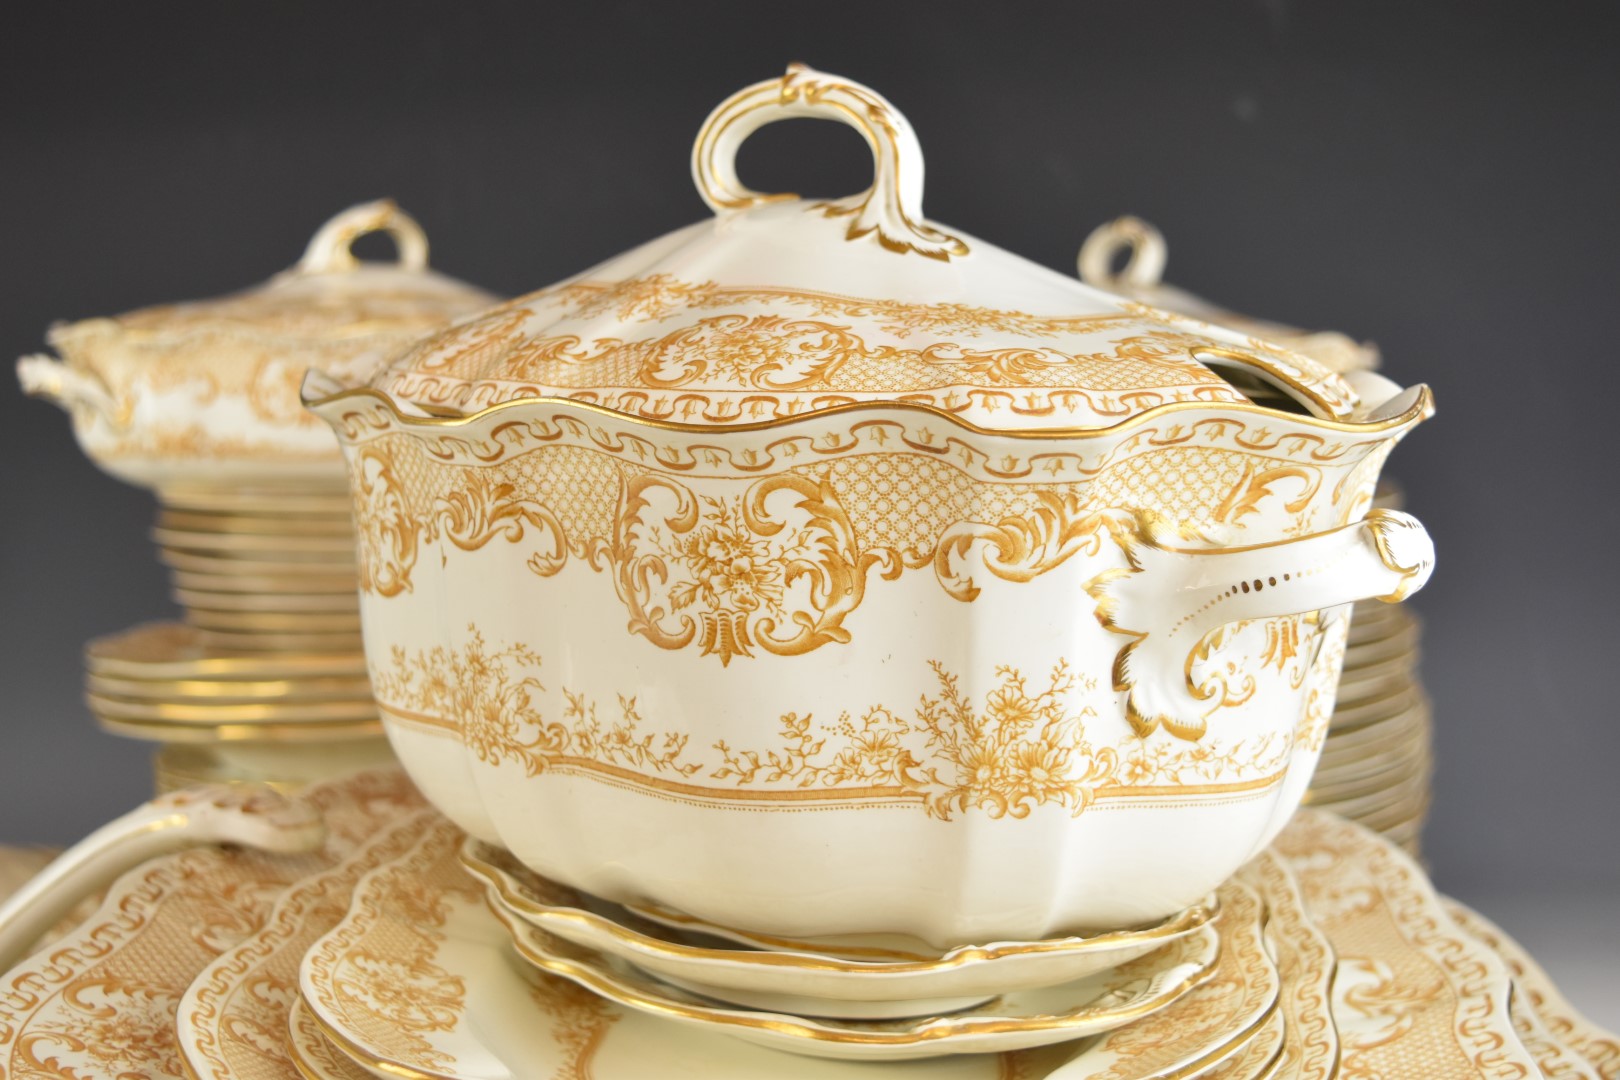 Royal Crown Derby dinner service including tureens, dinner plates and graduated meat plates, - Image 9 of 14